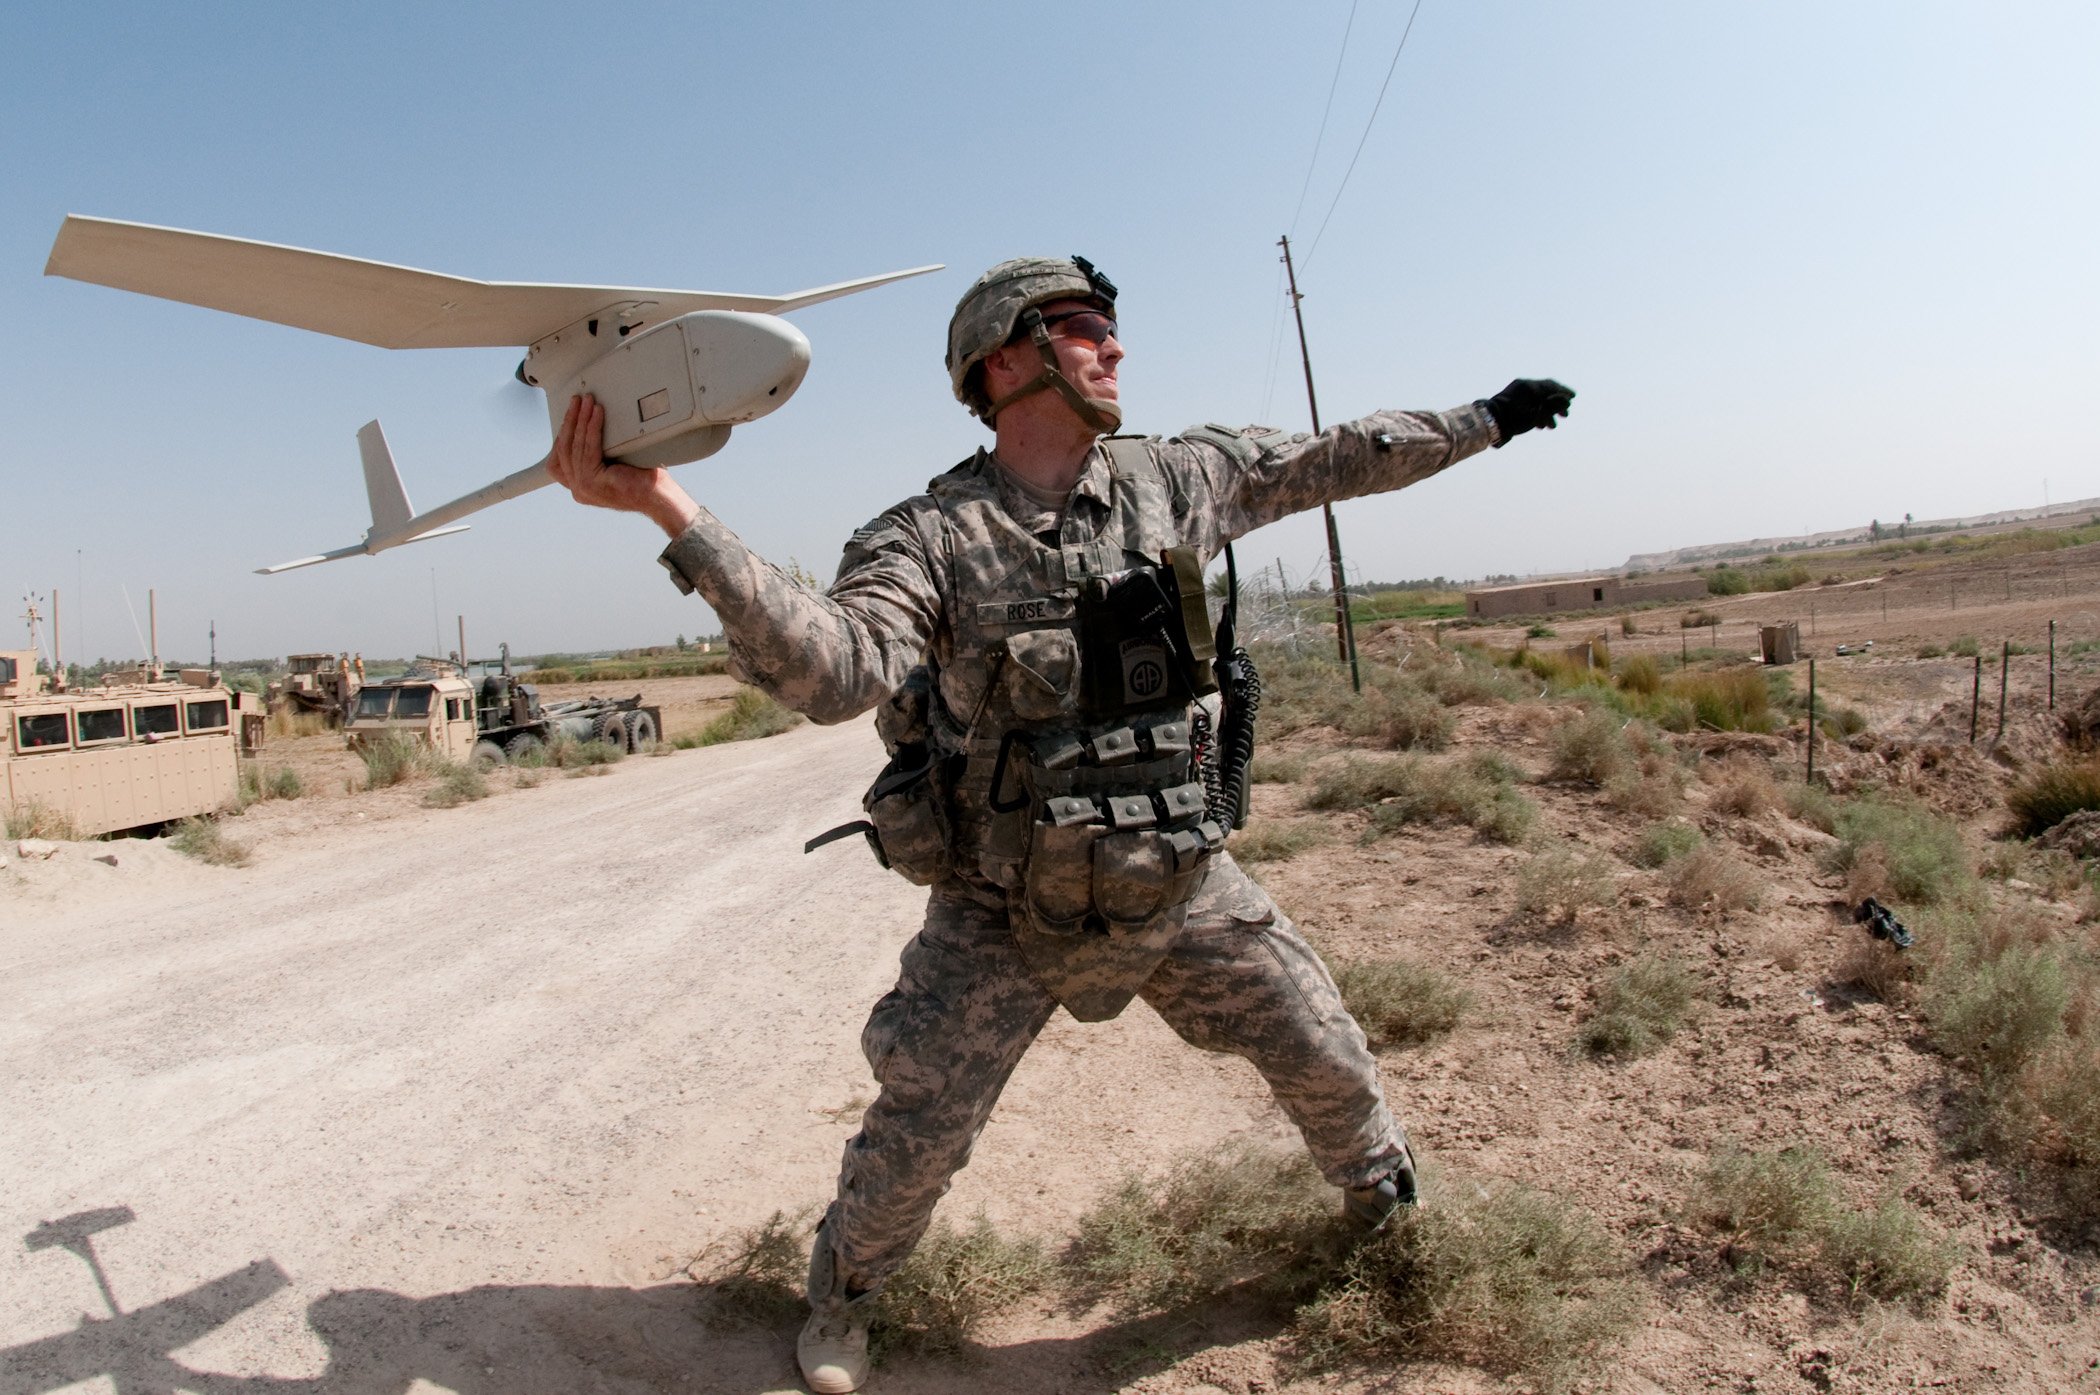 vulkansk plast Brink Small Drones Are Growing On The Air Force - Breaking Defense